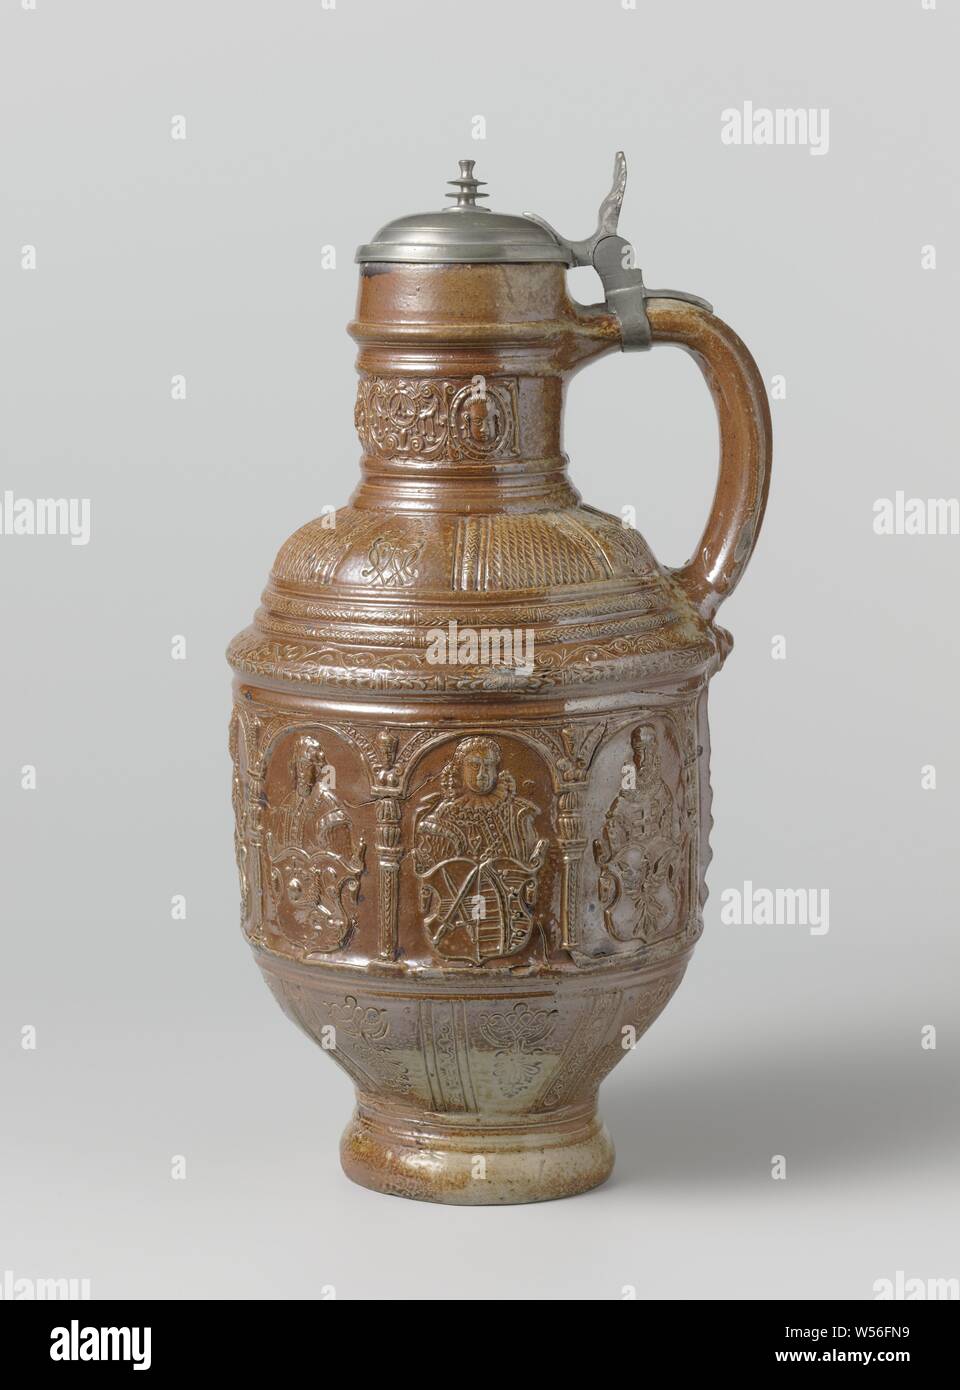 Jug with a representation of the electors, Stoneware jug on a high foot with a cylindrical body, round shoulder and wide neck. Profiles on the neck, body and foot. Covered with a brown engobe. On the belly in relief a printed and imposed band with bows. Under each arch is a Elector with his respective coat of arms (the Archbishops of Trier, Cologne and Mainz, the King of Bohemia, the Margrave of Brandenburg, Palzgraaf and the Duke of Saxony), with his title in the arc. In the leftmost box the date '1602'. The lower part of the abdomen is sloping towards the foot and has incised pockets Stock Photo